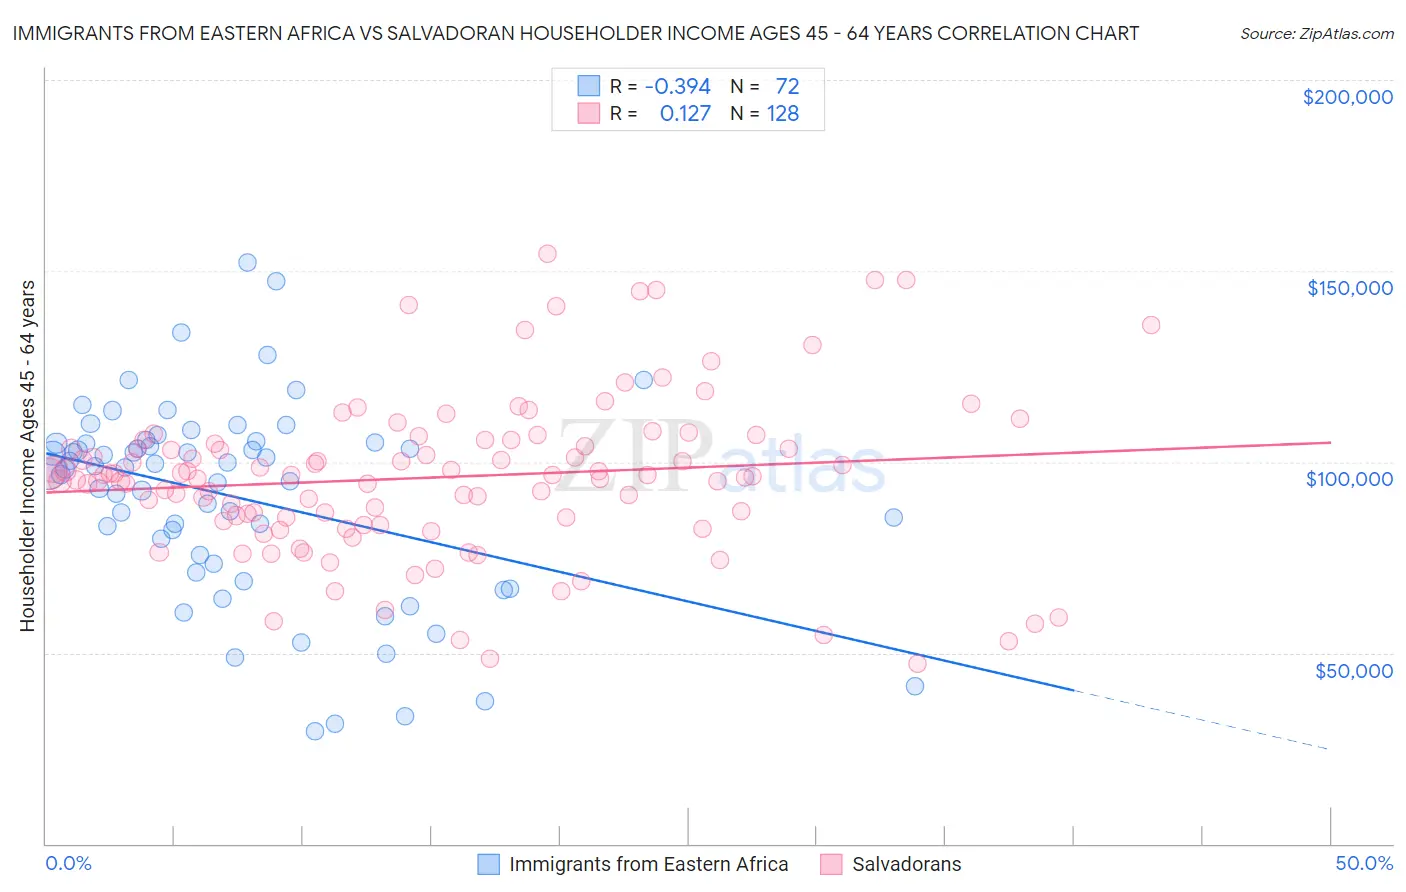 Immigrants from Eastern Africa vs Salvadoran Householder Income Ages 45 - 64 years